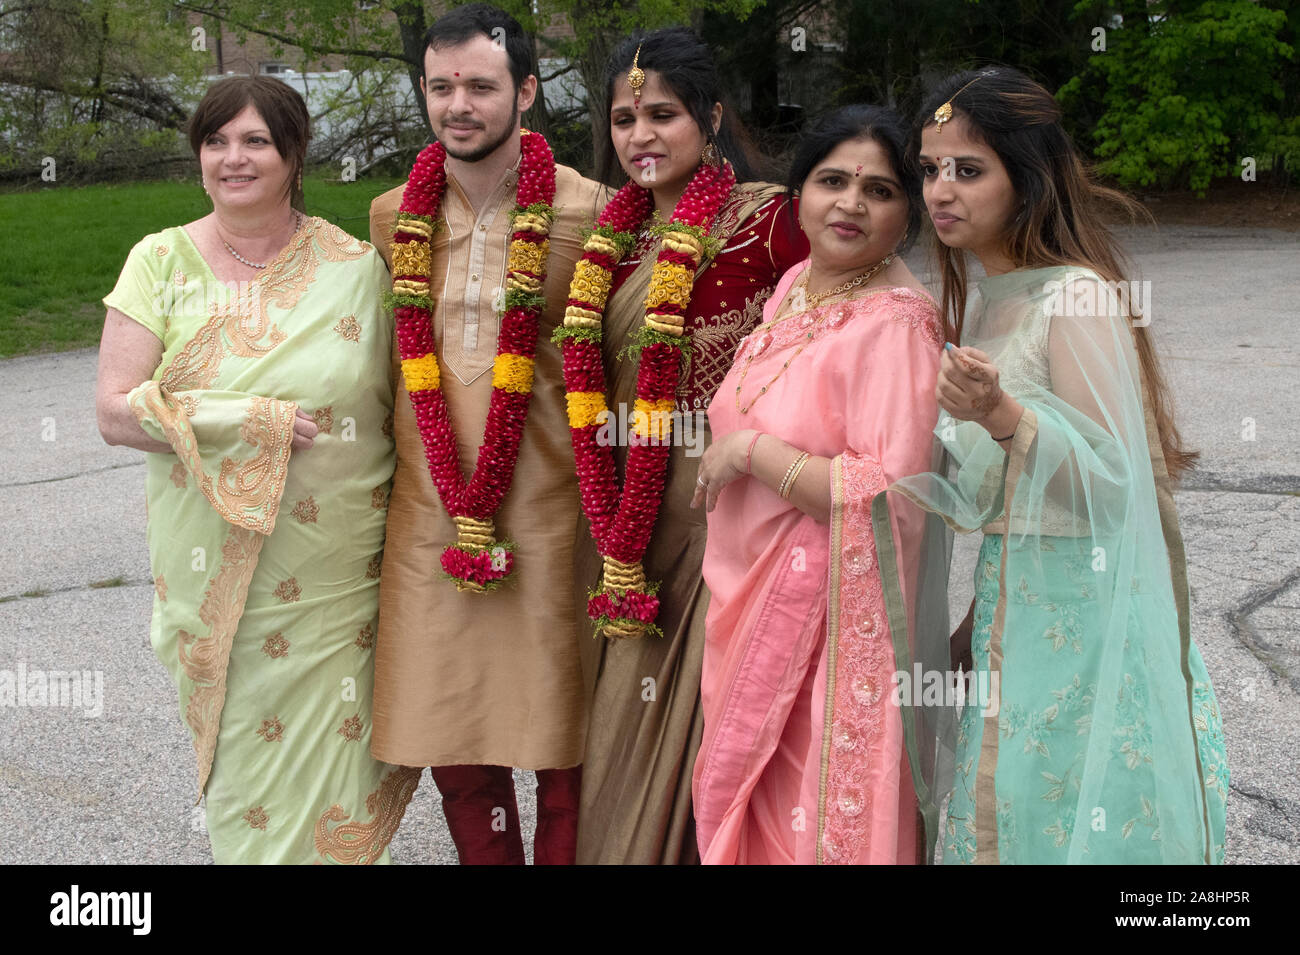 Wedding party at Indian wedding in USA Stock Photo